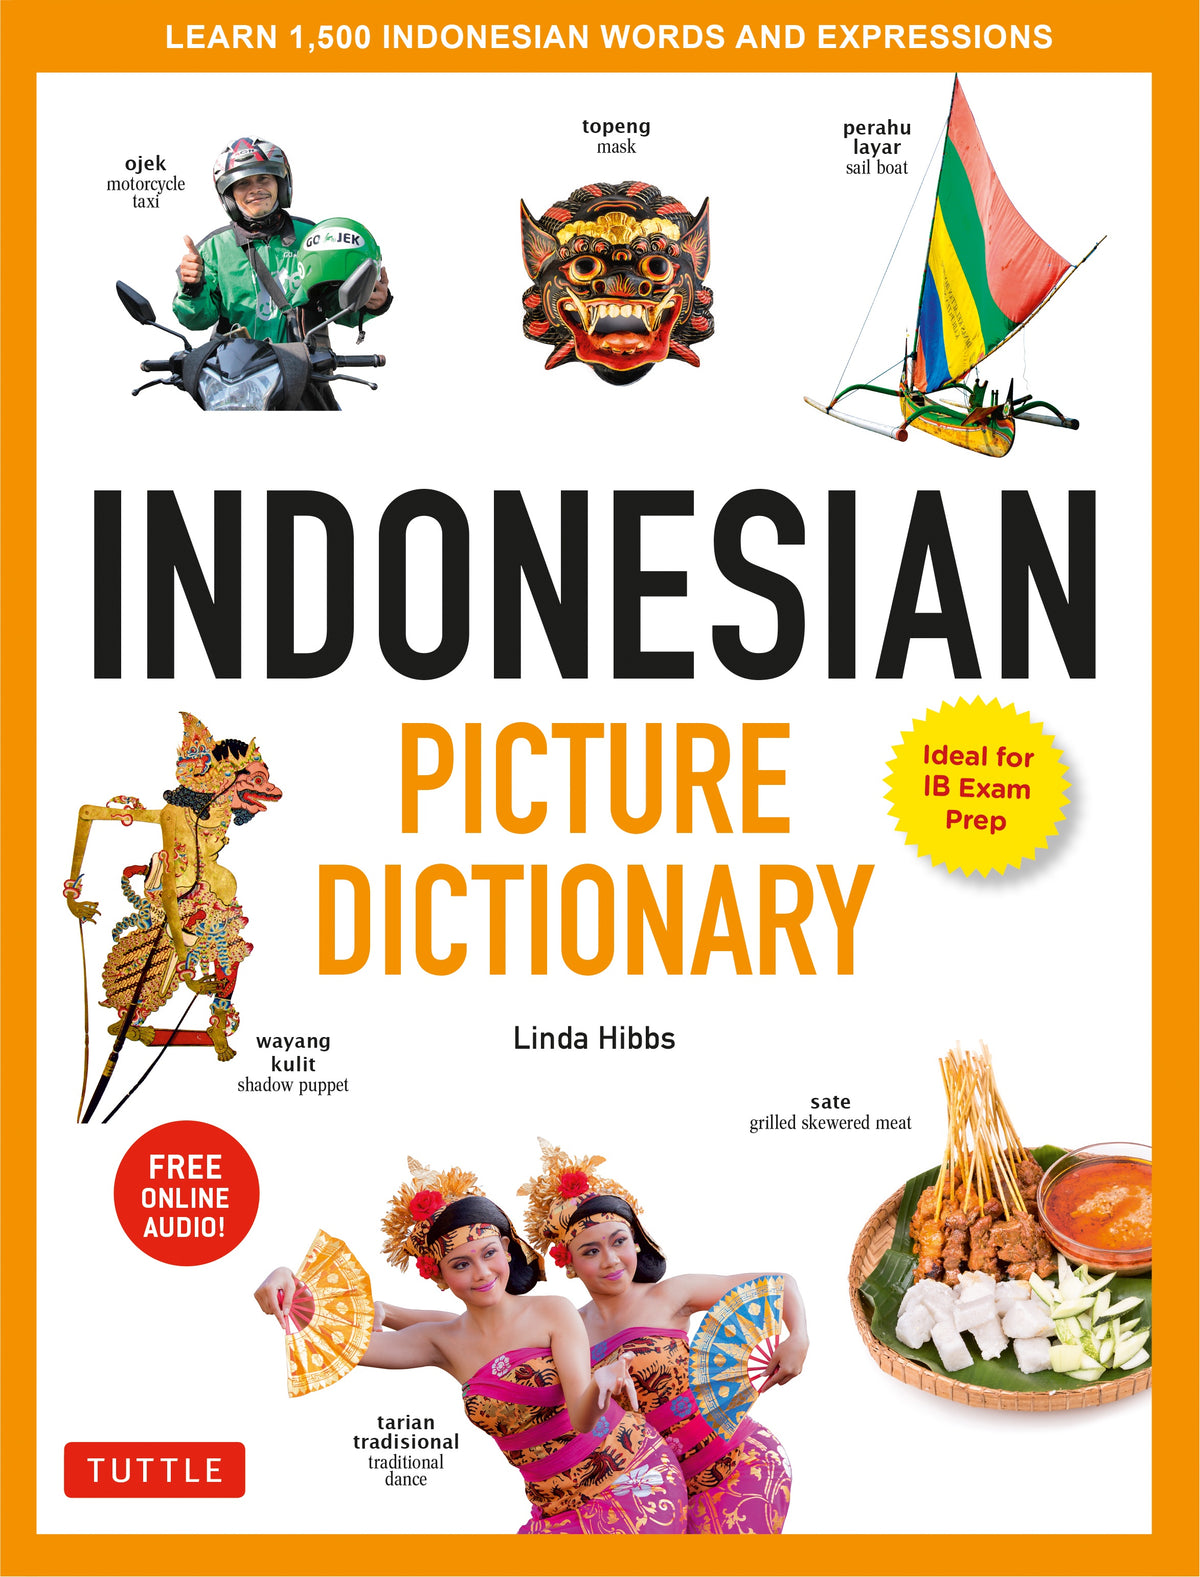 INDONESIAN PICTURE DICTIONARY